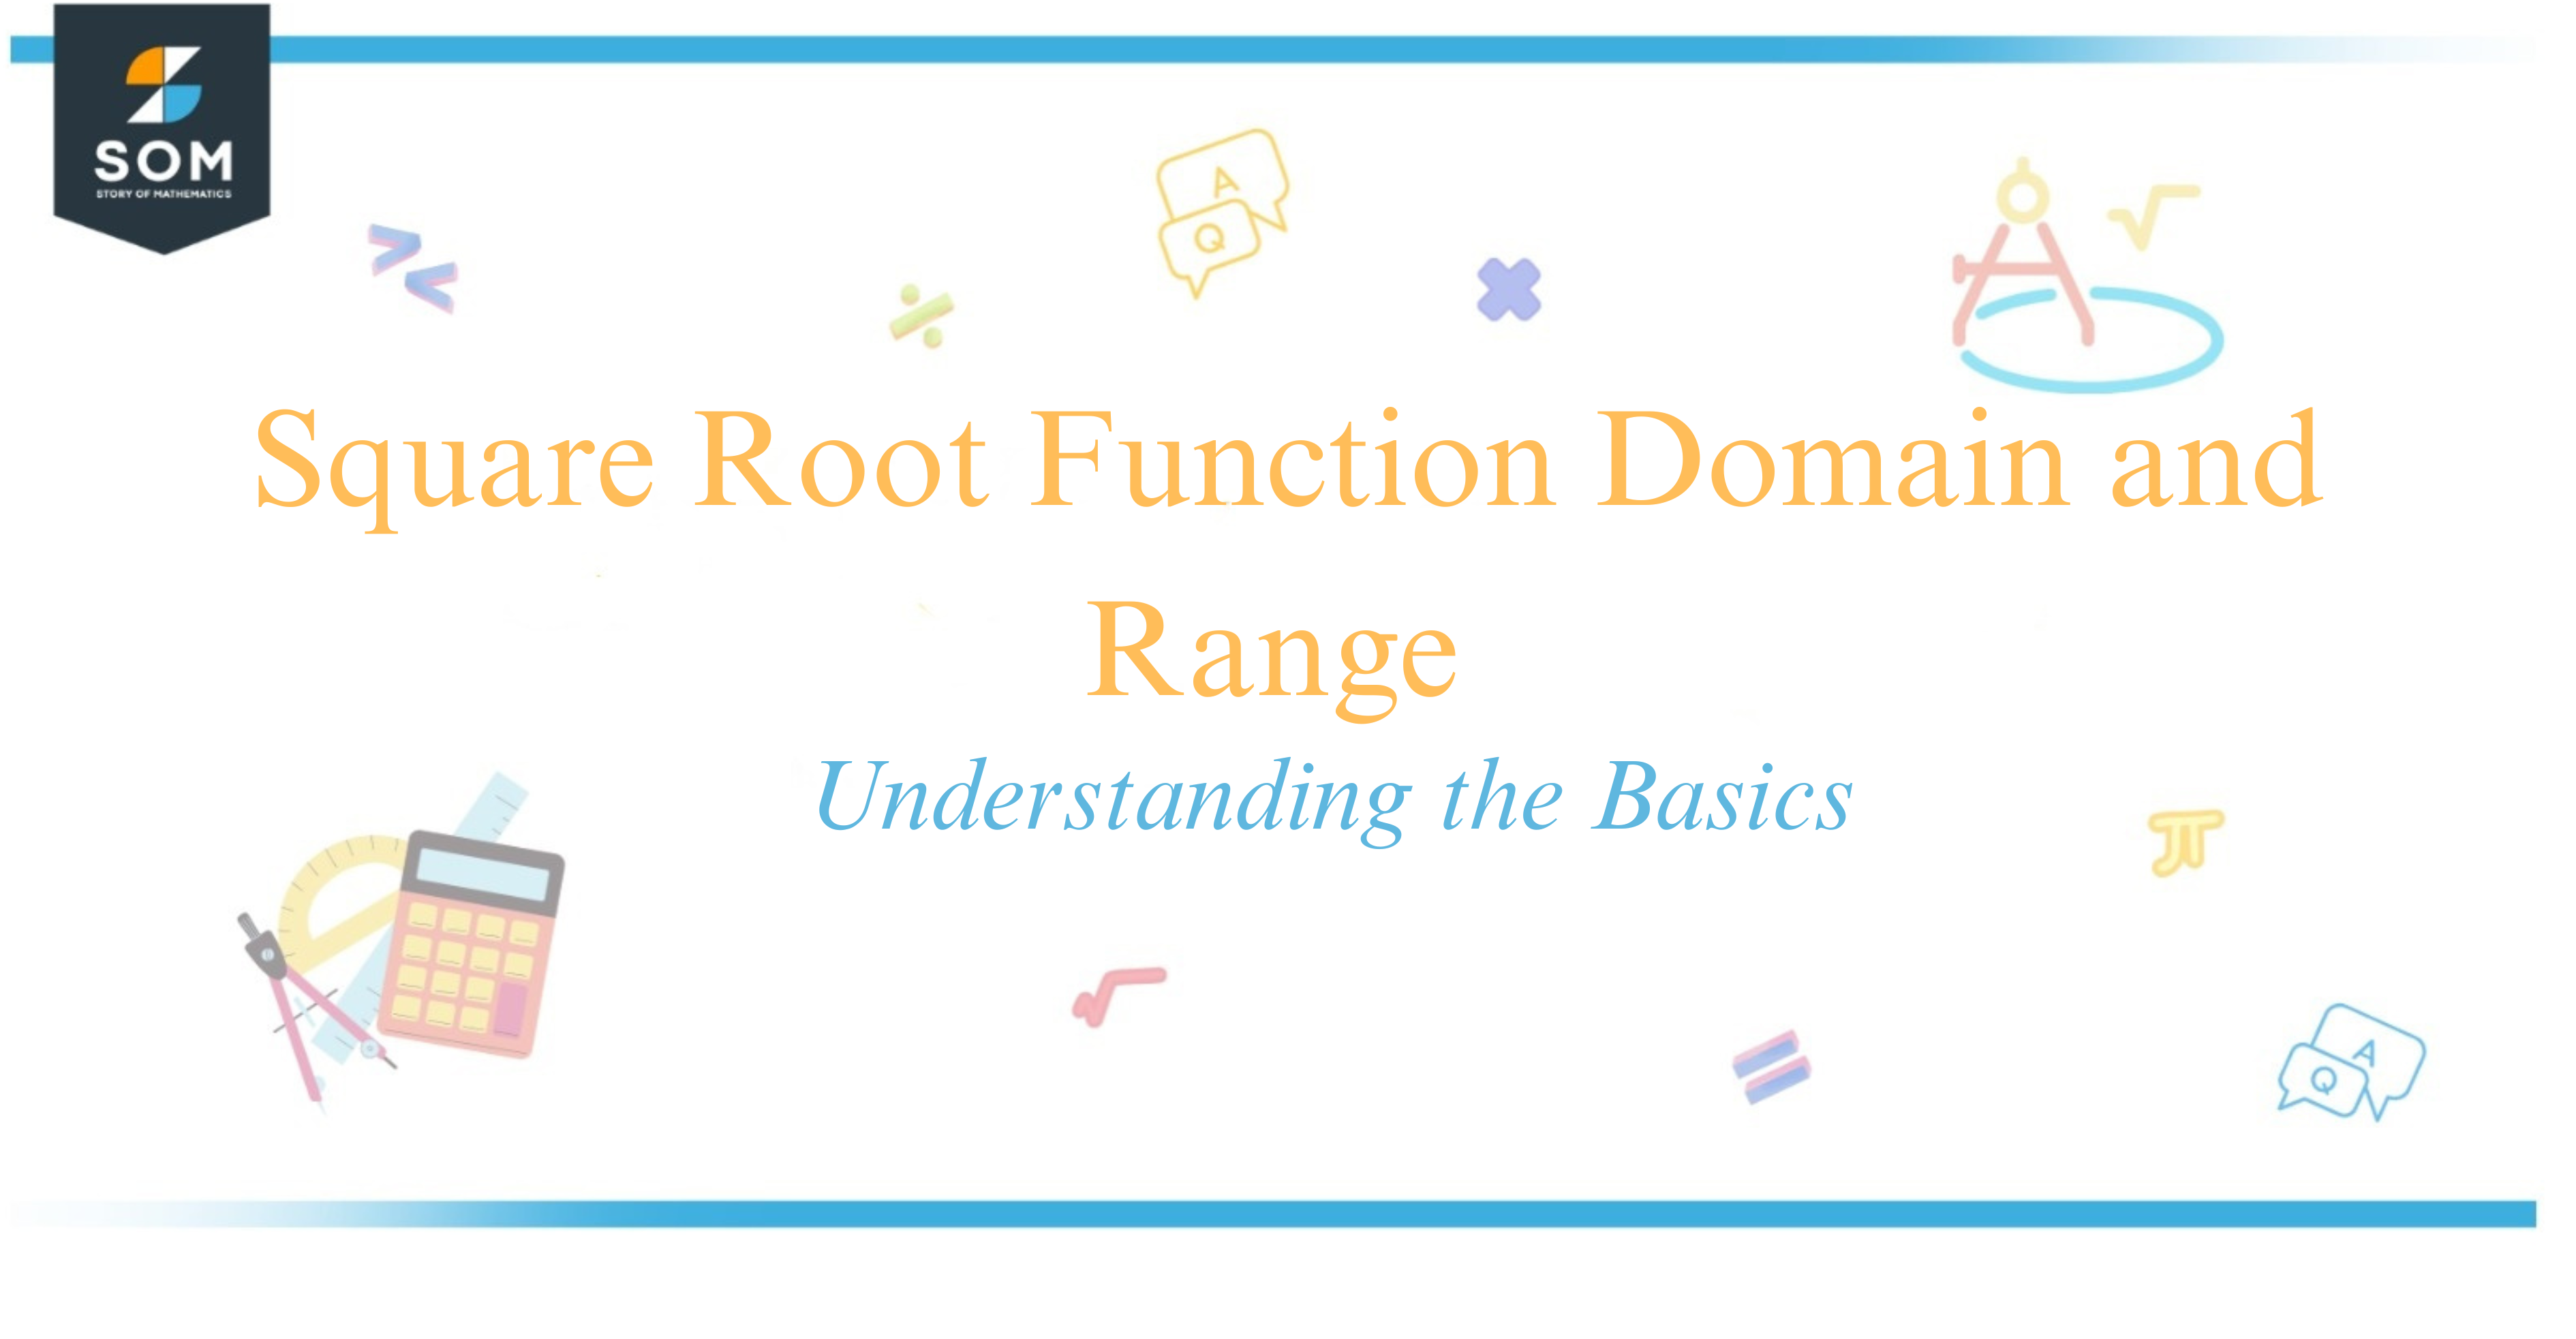 Square Root Function Domain and Range Understanding the Basics